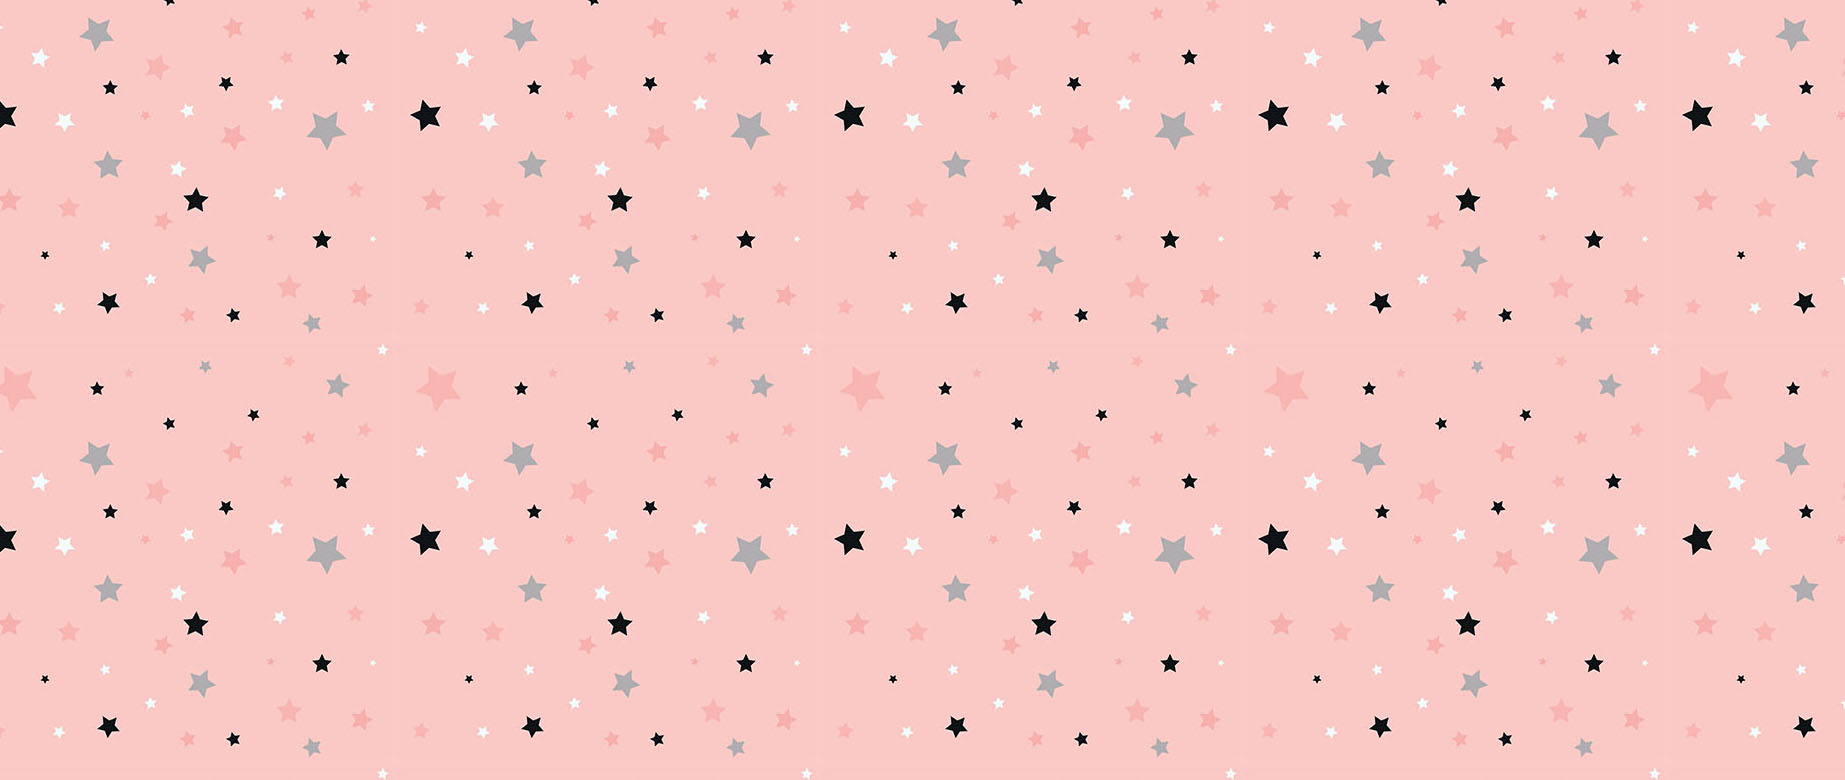 colourful-stars-in-pink-sky-wallpaper-seamless-repeat-view